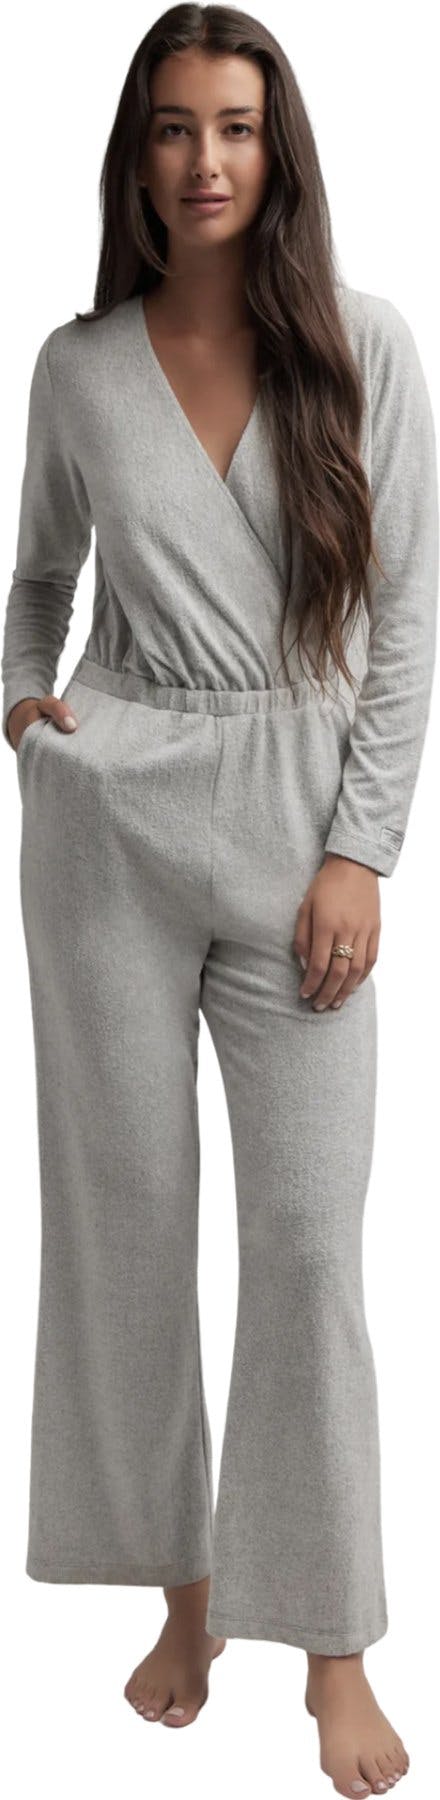 Product image for Recycled So-Soft Jumpsuit - Women's